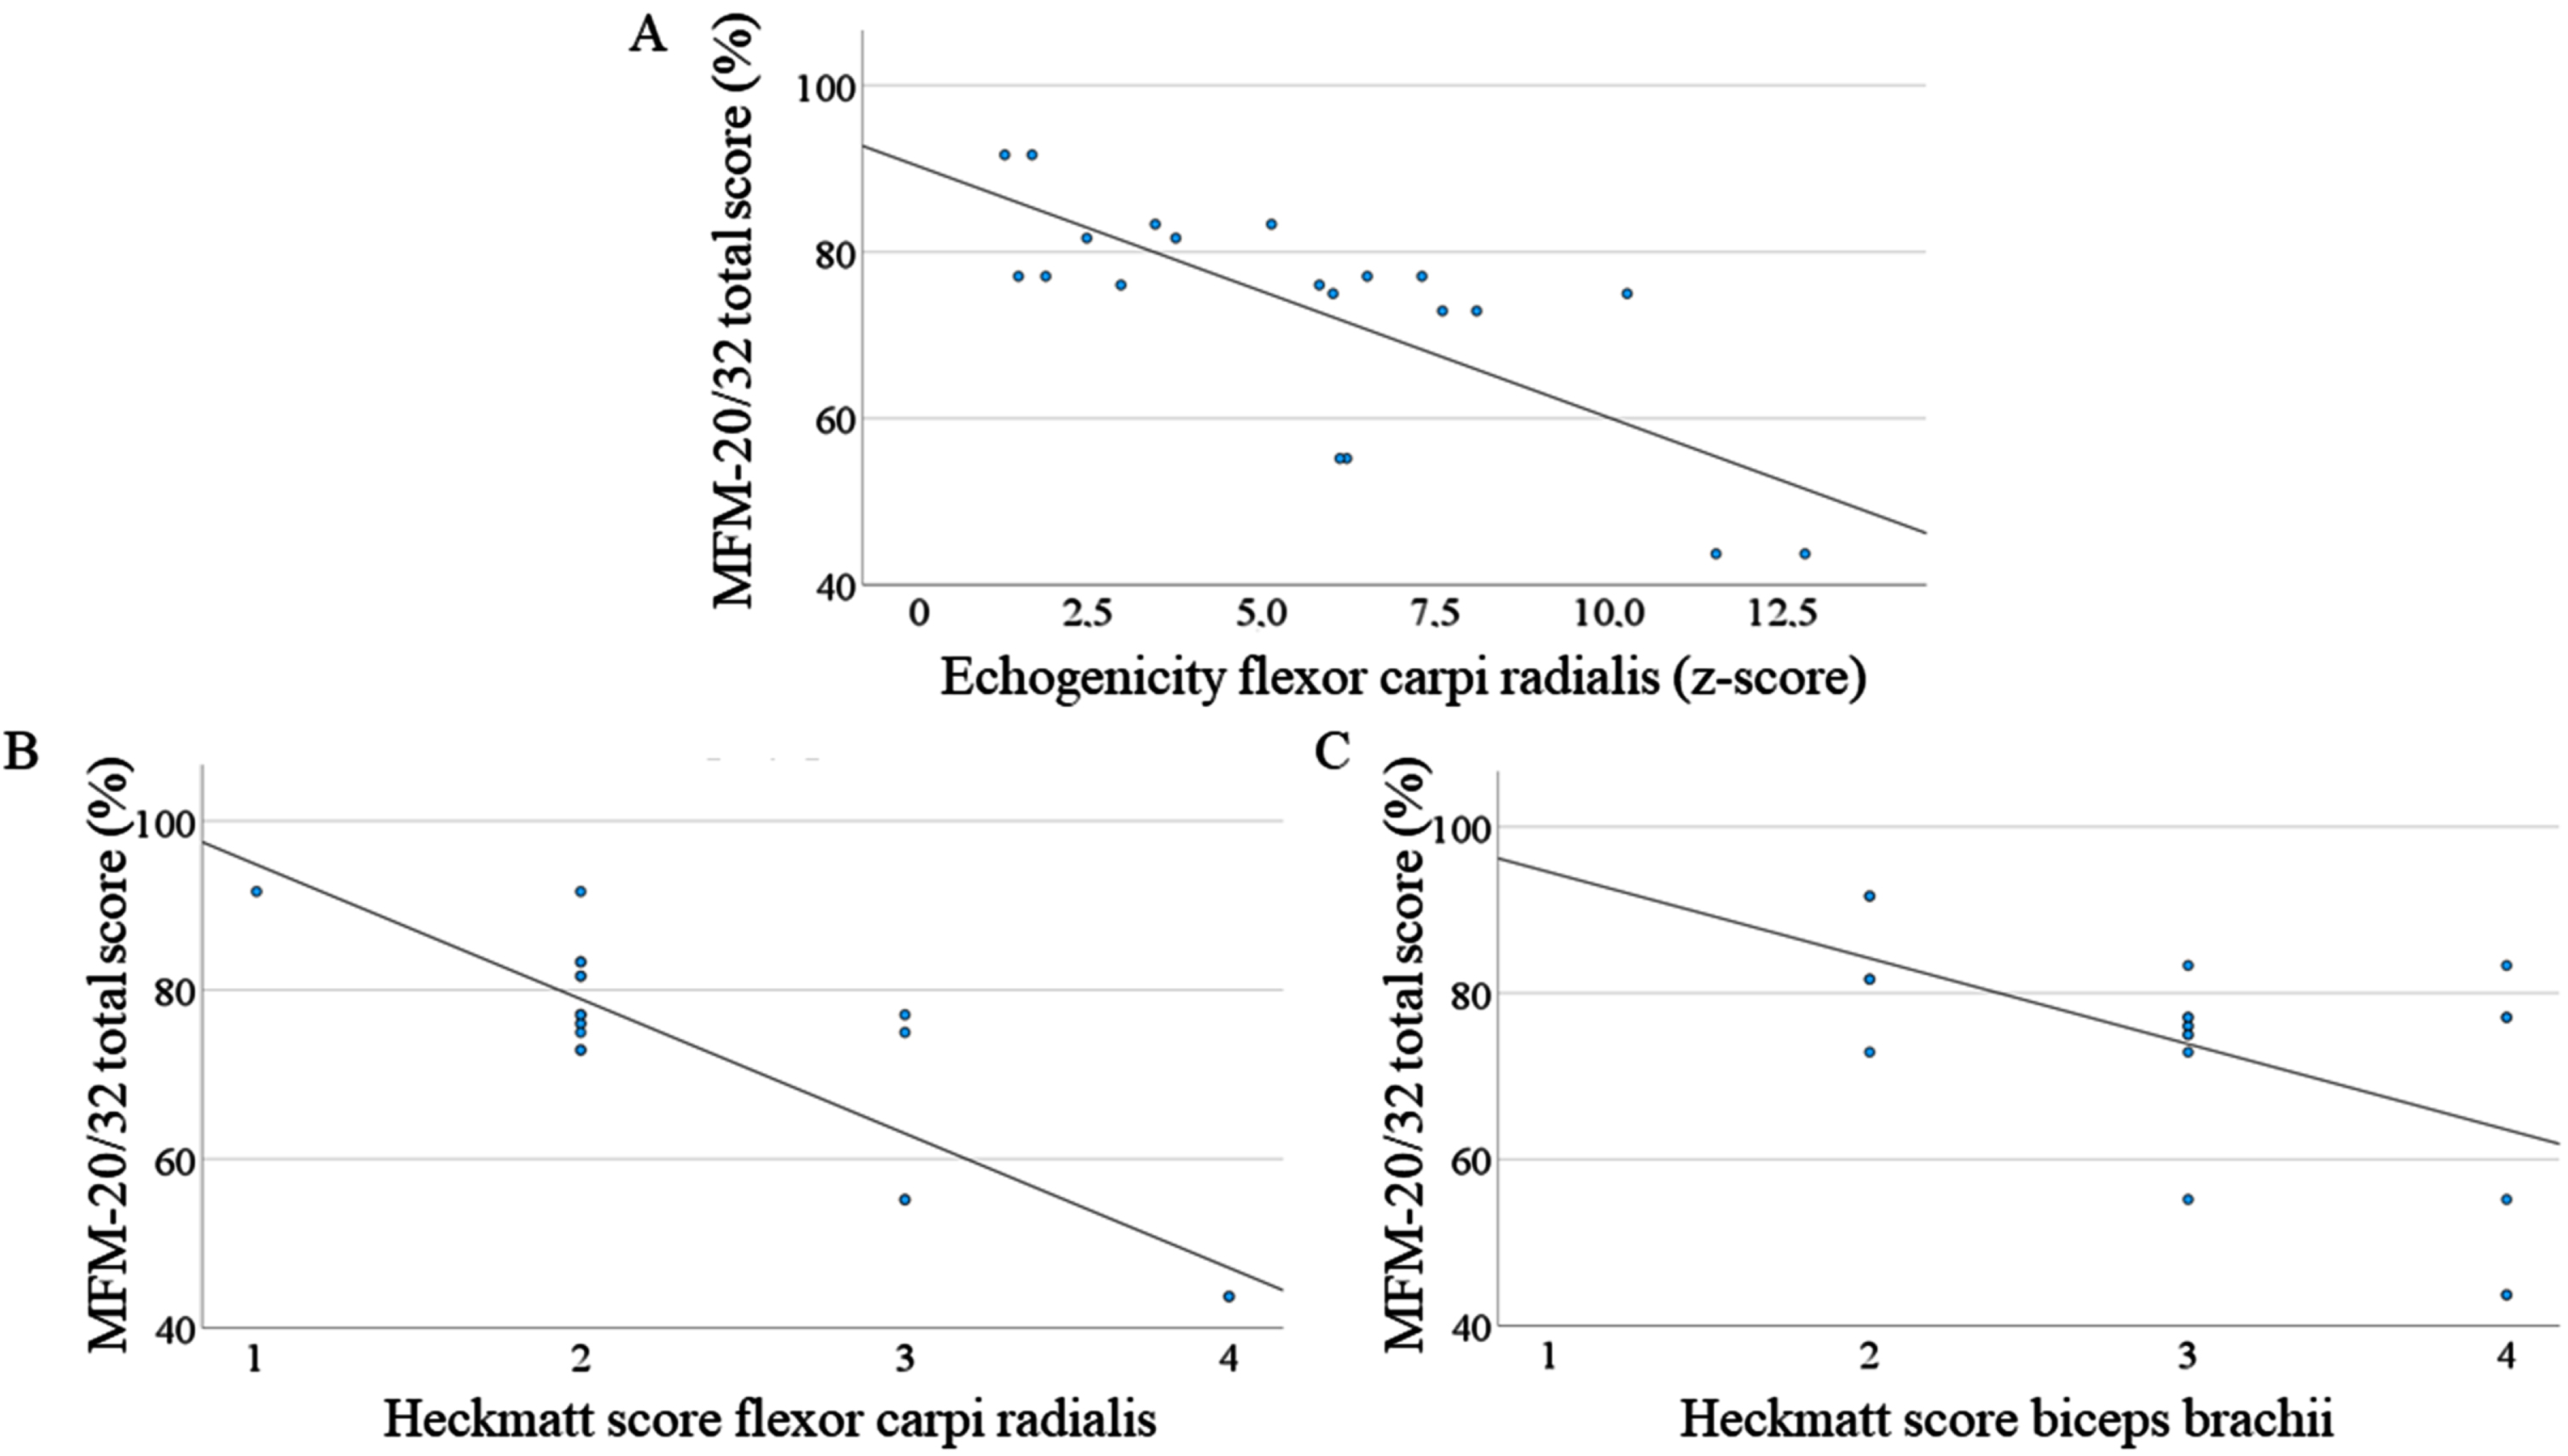 Correlation between MFM-20/32 total score and muscle ultrasound (echogenicity and Heckmatt score). (A) Correlation between the z-score of echogenicity of flexor carpi radialis muscles and the total MFM-20/32 score (Pearson’s correlation, –0.750, p < 0.01). (B) Correlation between Heckmatt score of flexor carpi radialis muscles and the total MFM-20/32 score (Pearson’s correlation, –0.874, p < 0.01). (C) Correlation between Heckmatt score of biceps brachii muscles and the total MFM-20/32 score (Pearson’s correlation, –0.576, p < 0.01). MFM-20/32 = Motor Function Measurement 20/32.